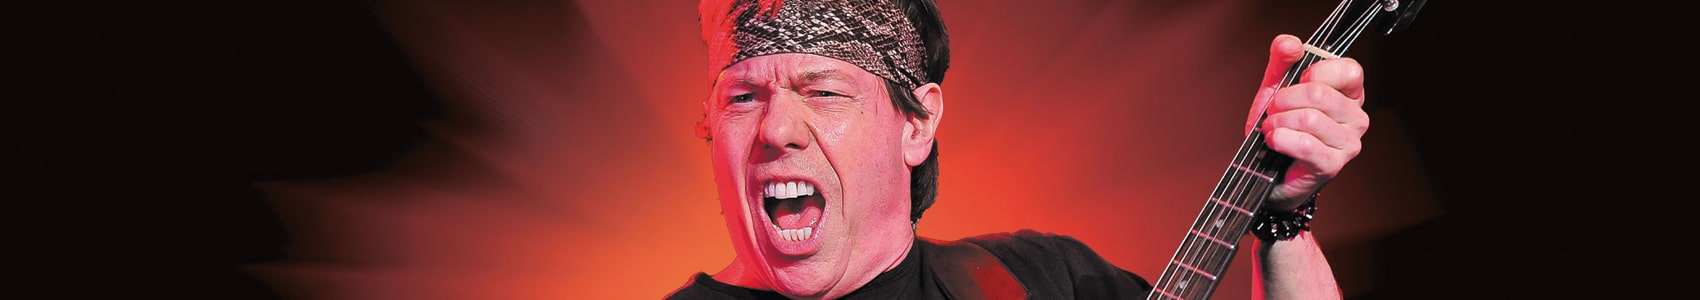 GEORGE THOROGOOD & THE DESTROYERS ANNOUNCE GOOD TO BE BAD TOUR: 45 YEARS OF ROCK 